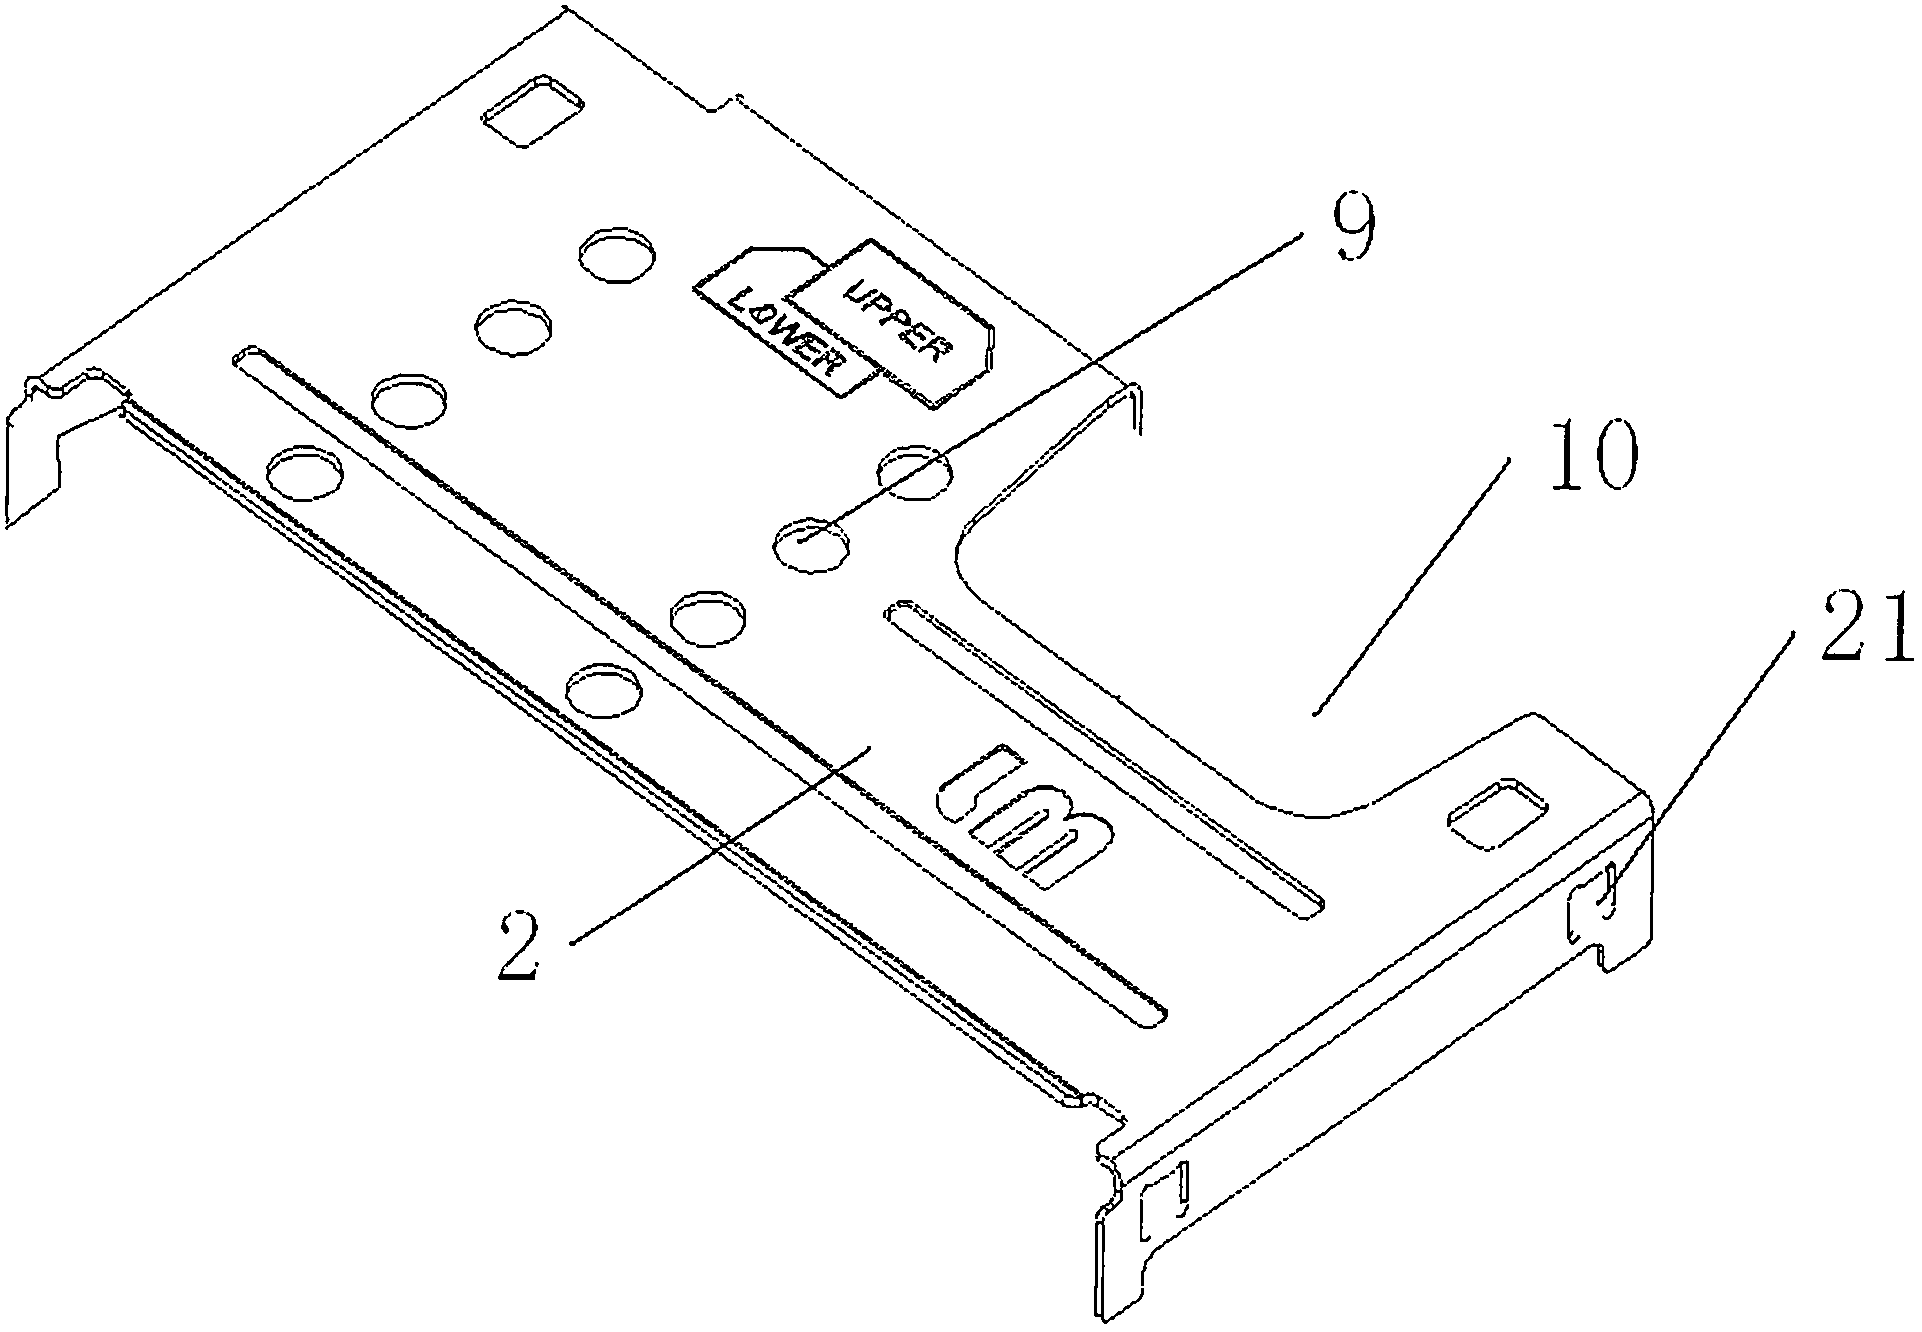 Side-inserting double-layer SIM (subscriber identity module) card socket